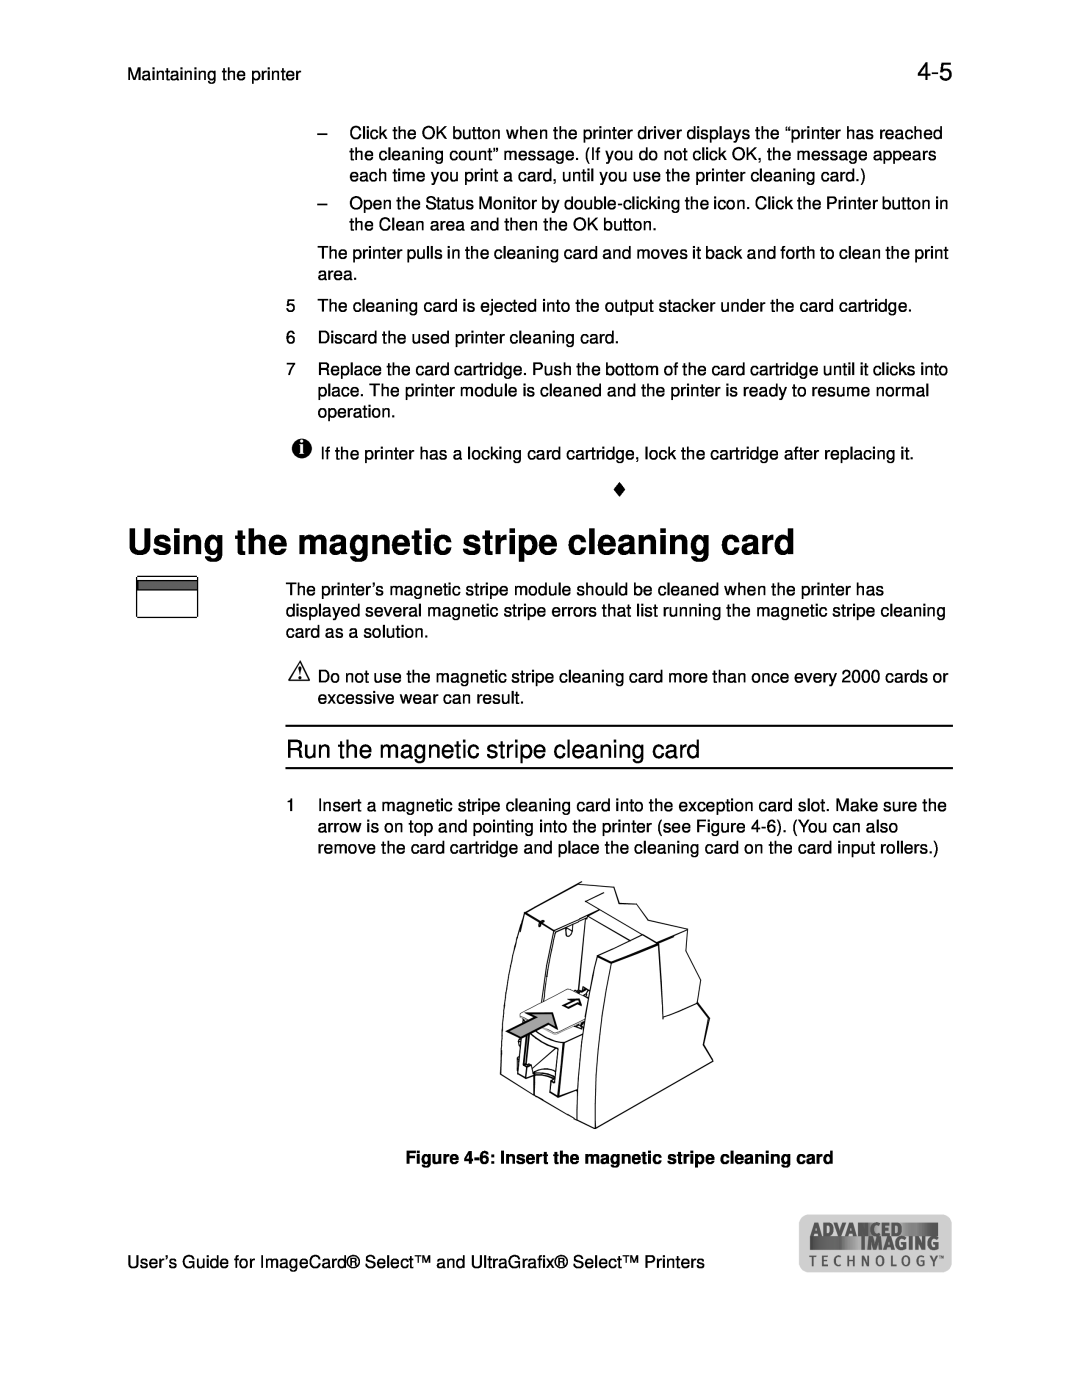 Datacard Group ImageCard SelectTM and UltraGrafix SelectTM Printers manual Using the magnetic stripe cleaning card 